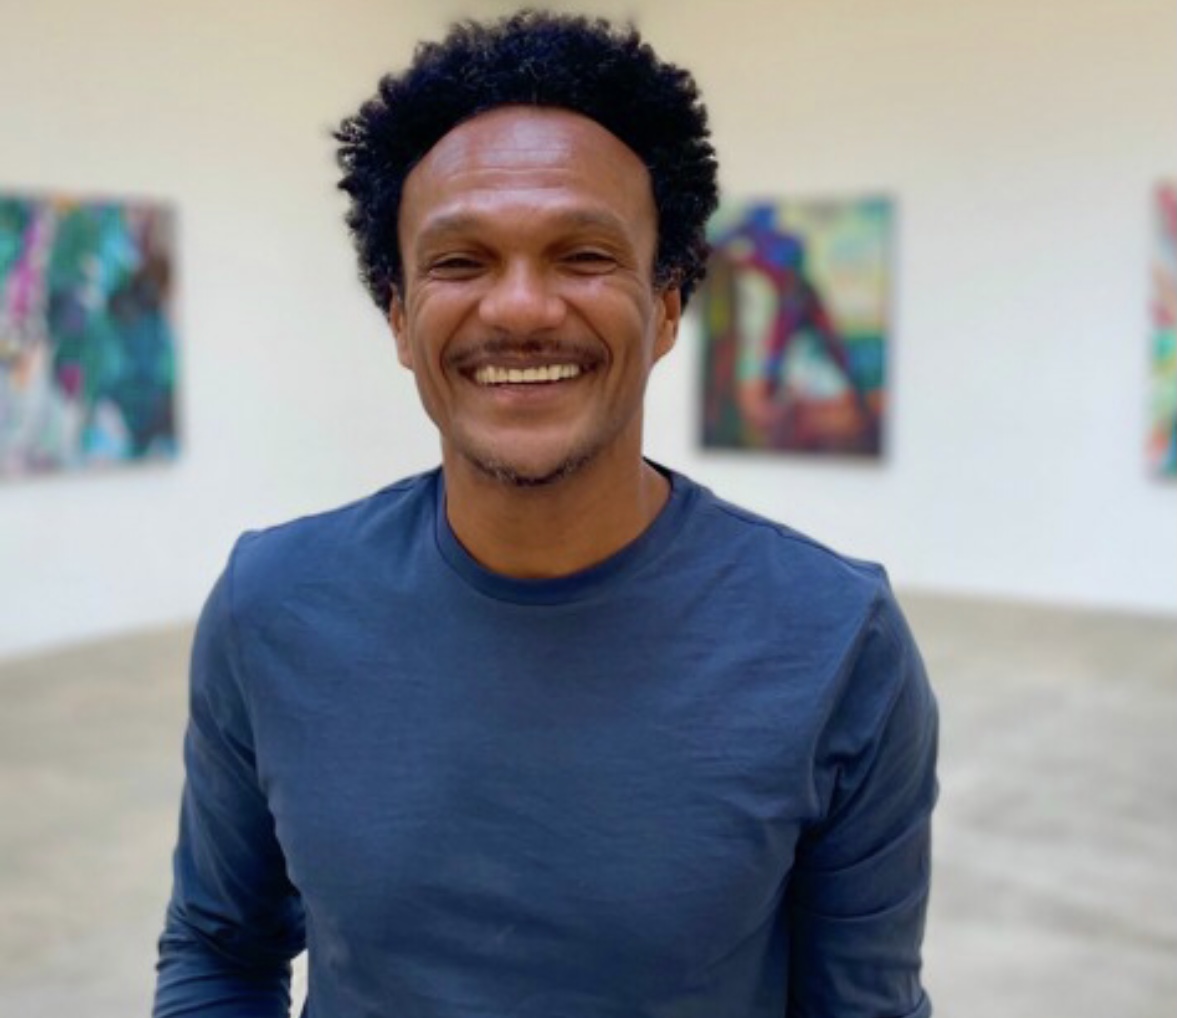 Local Artist Che Lovelace painting acquired by LA art museum